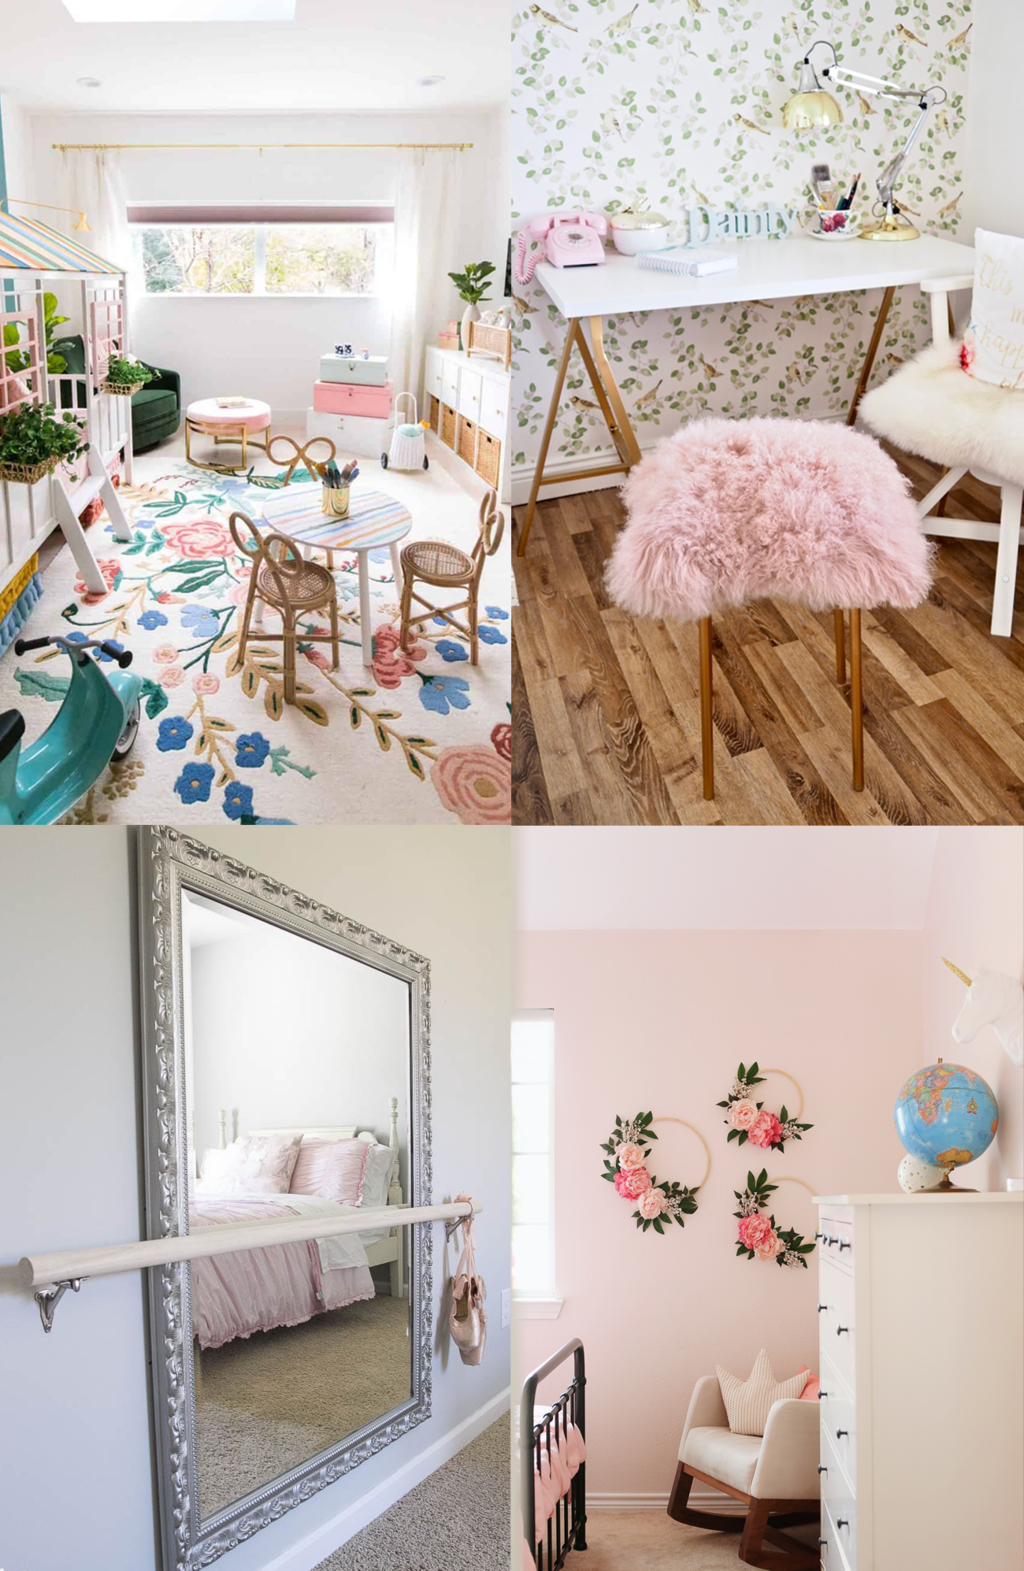 21 Best Pink Rooms 2021 - Gorgeous Pink Room Decor Ideas